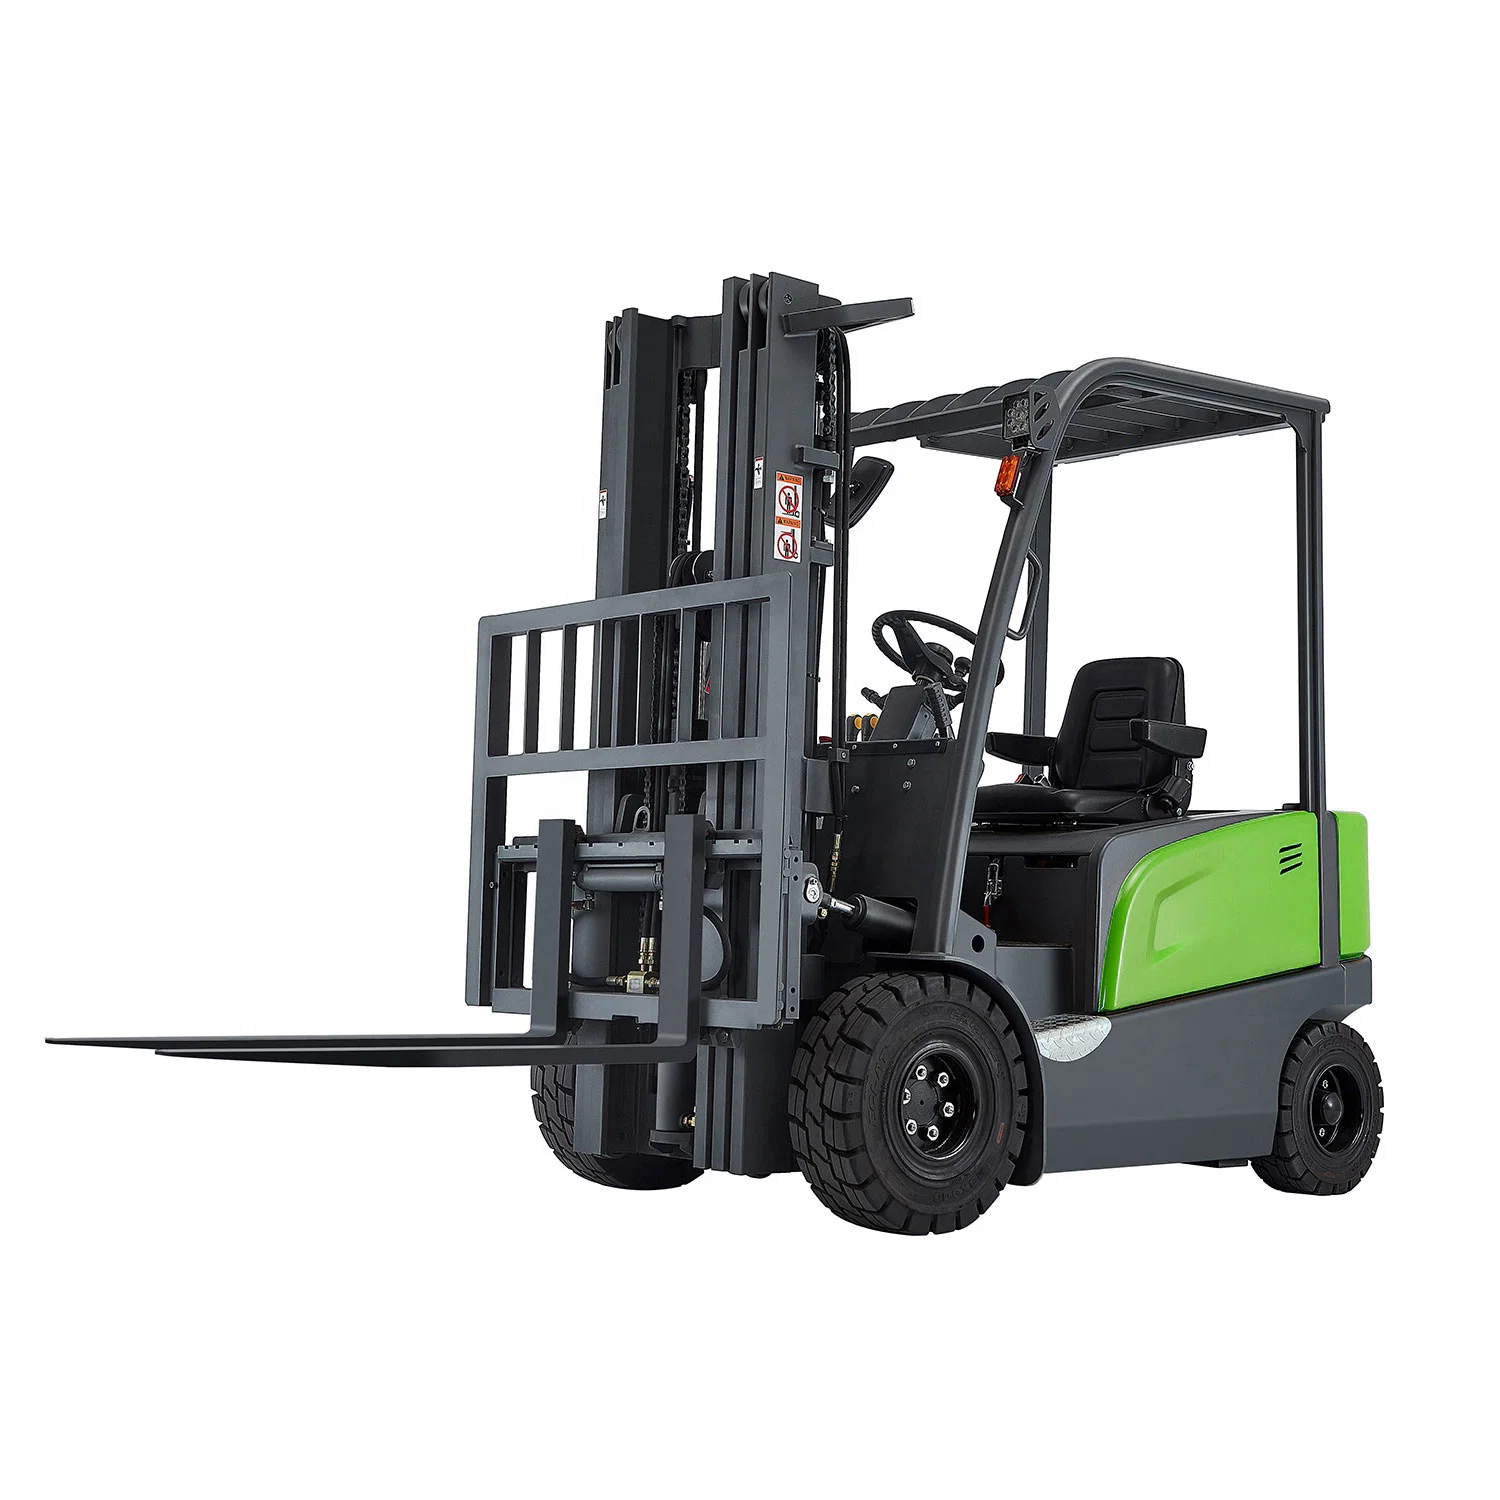 China Supplier 2.0t/Ton 2000kg Battery Electric Forklift/Forklift Truck Used Warehouse